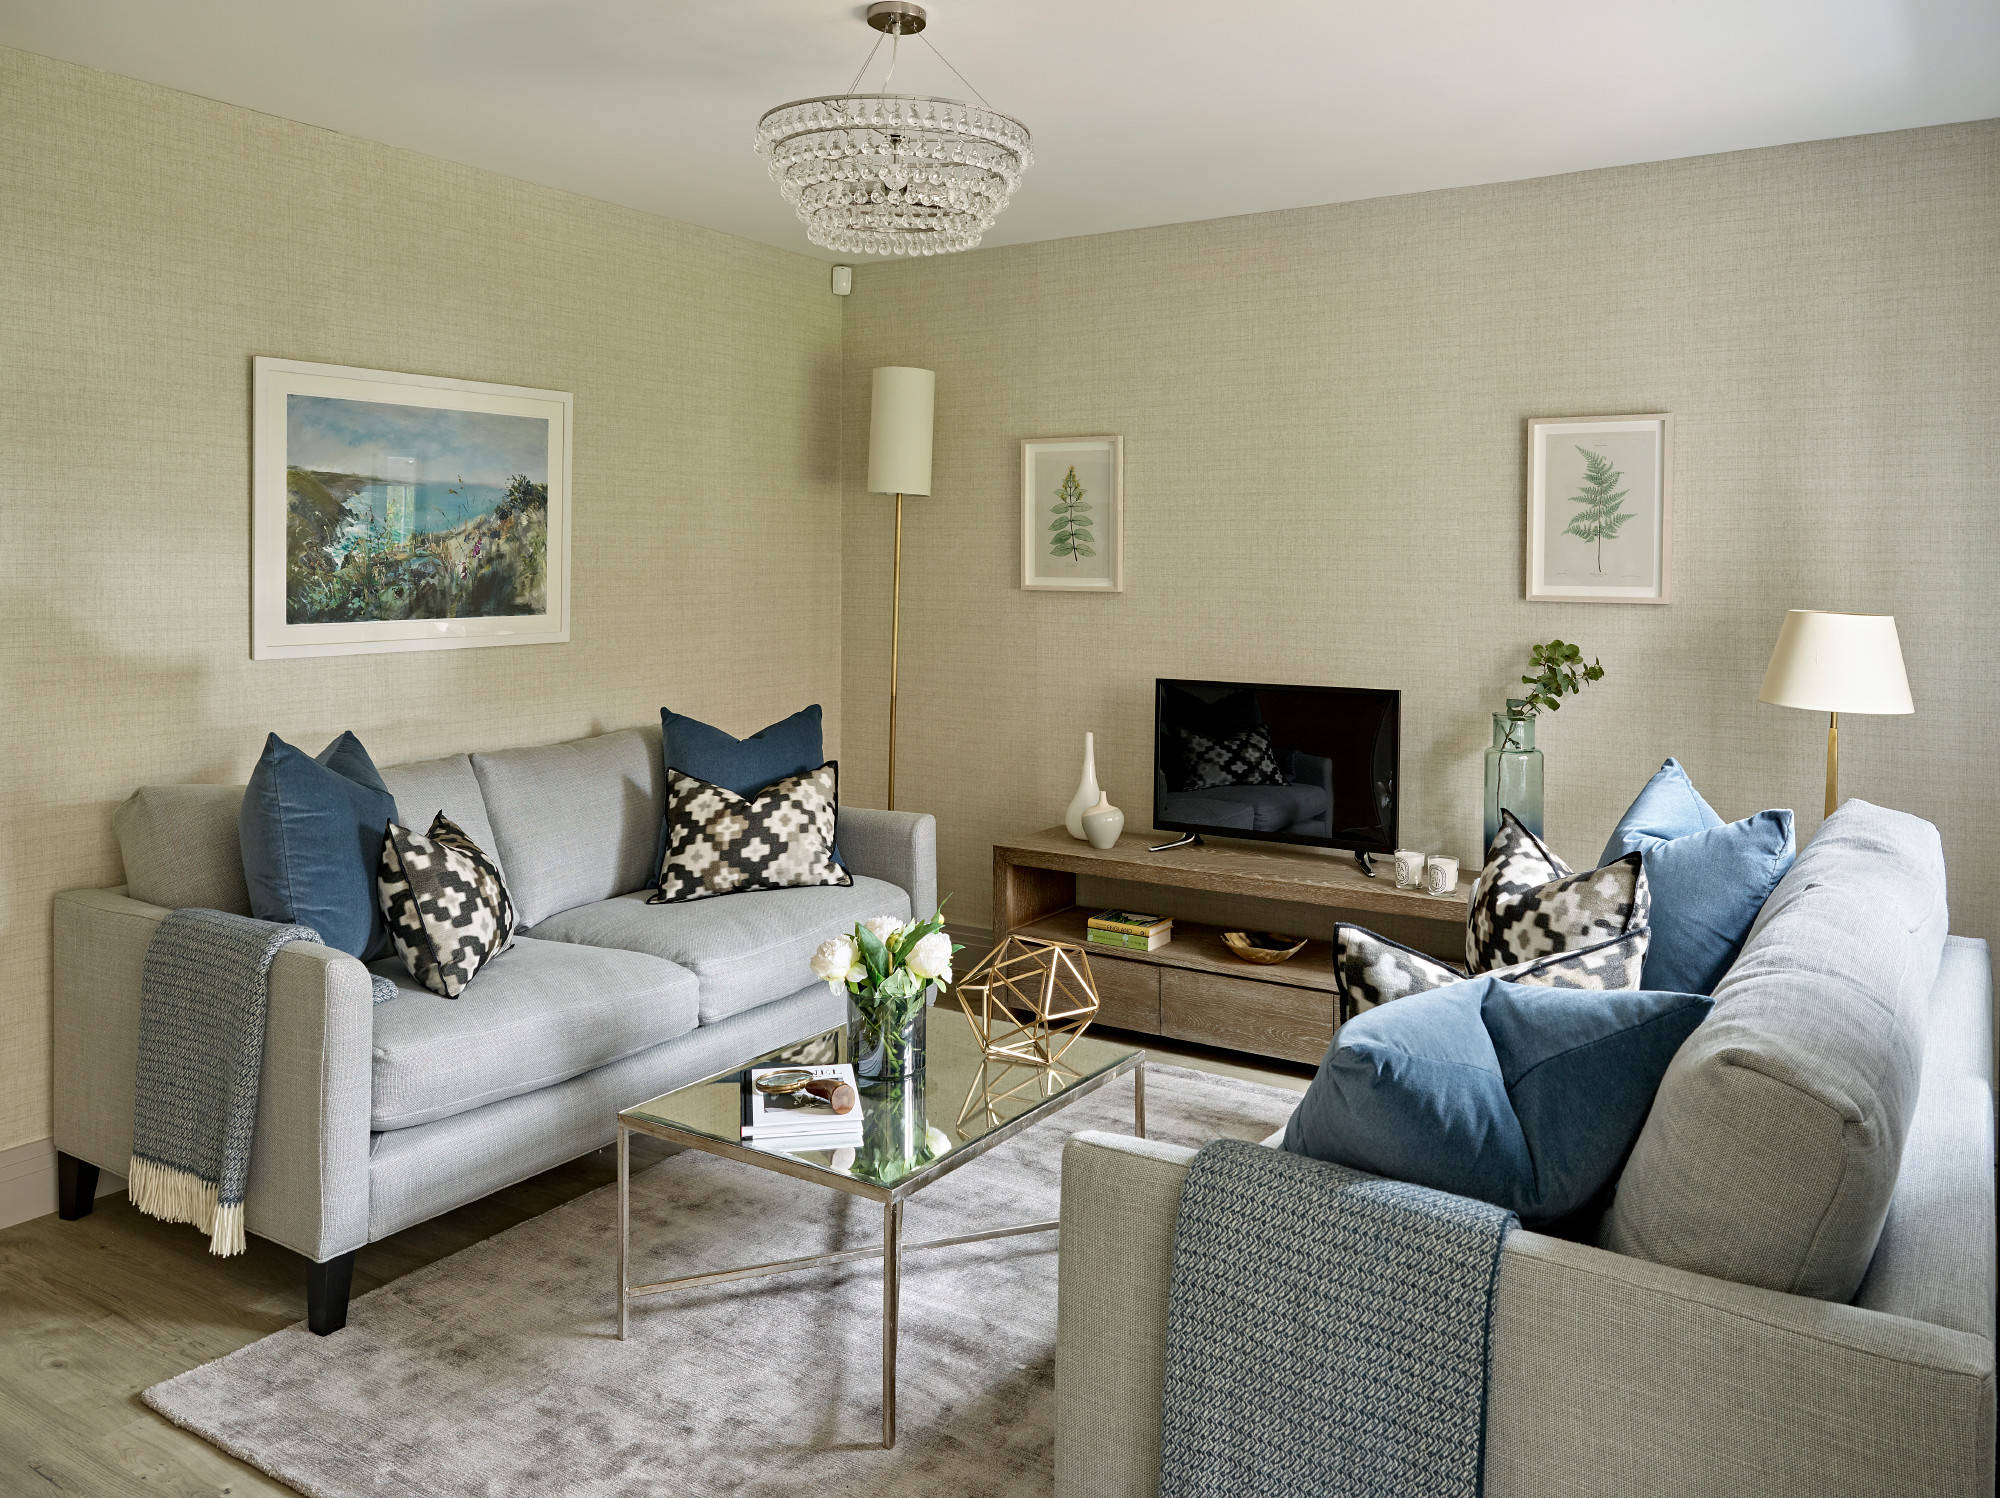 10 ways to arrange the furniture in your living room | houzz uk